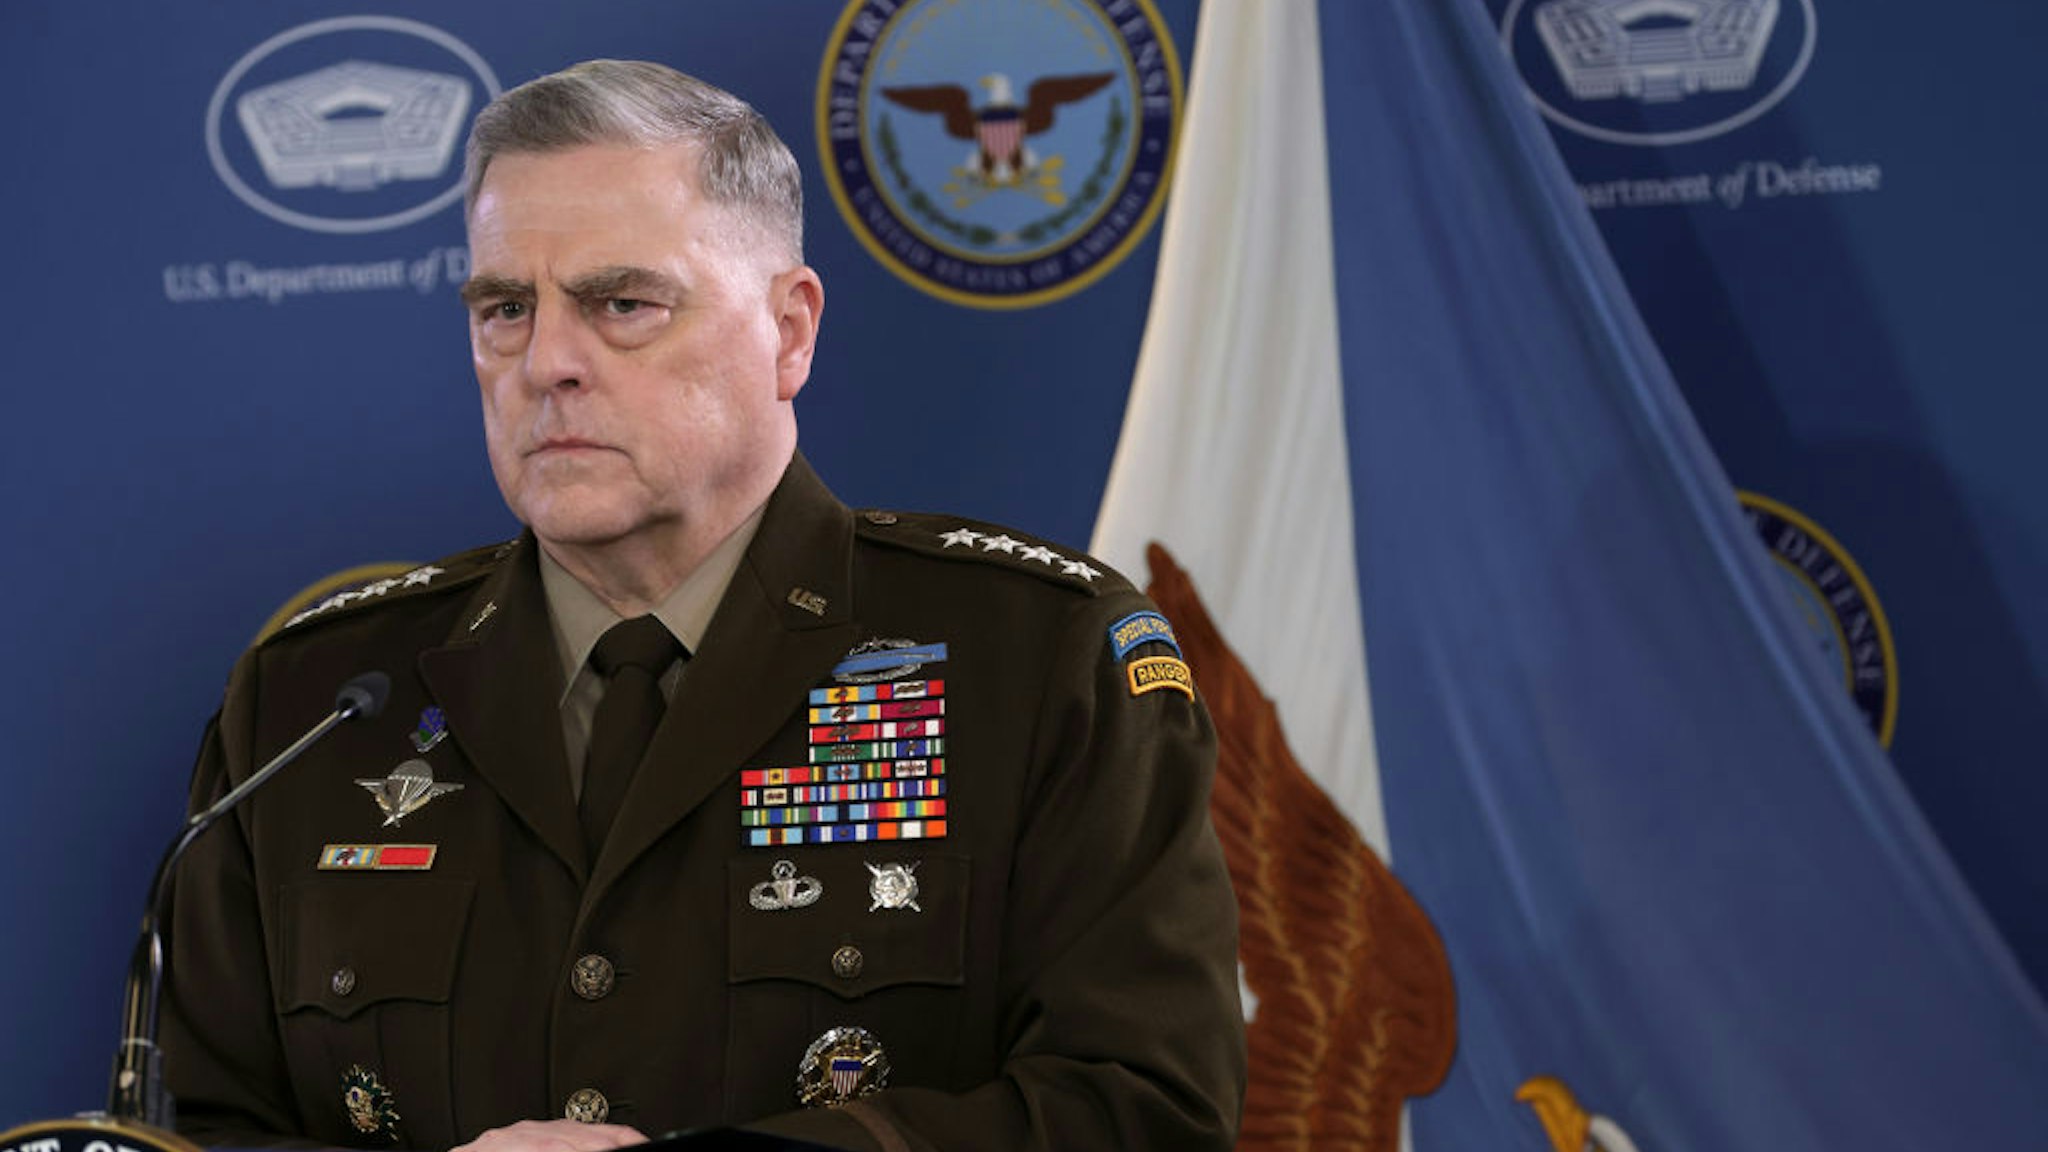 ARLINGTON, VIRGINIA - MARCH 15: Chairman of the Joint Chiefs of Staff Army Gen. Mark Milley listens during a press conference at the Pentagon on March 15, 2023 in Arlington, Virginia. Gen. Milley and U.S. Secretary of Defense Lloyd Austin discussed various topics including the downing of an American MQ-9 Reaper drone in the Black Sea by Russian fighter jets. (Photo by Alex Wong/Getty Images)